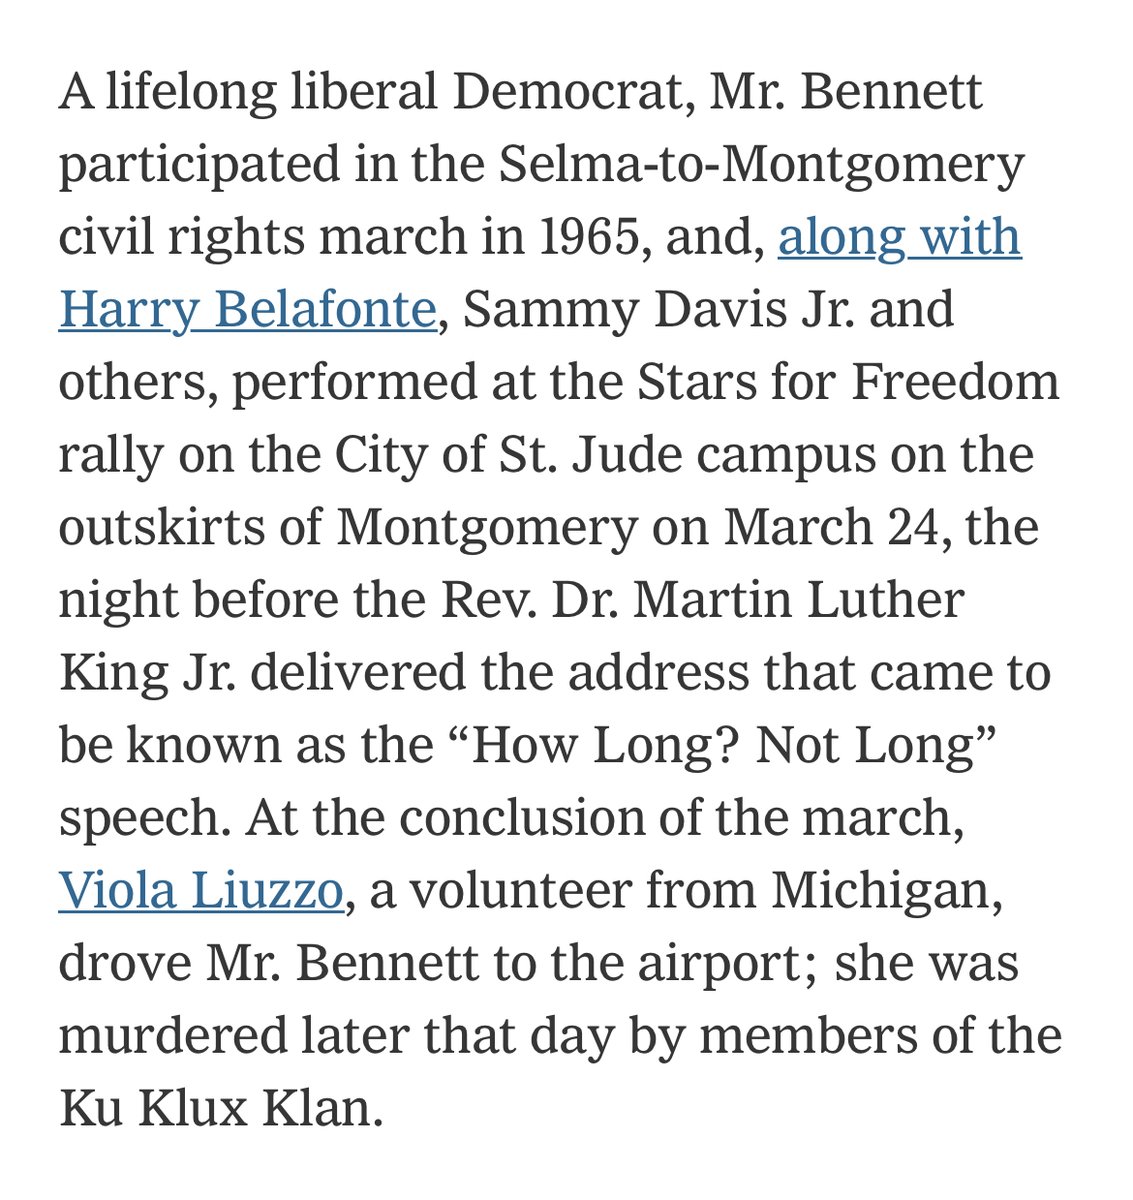 From the Tony Bennett obituary in the @nytimes: